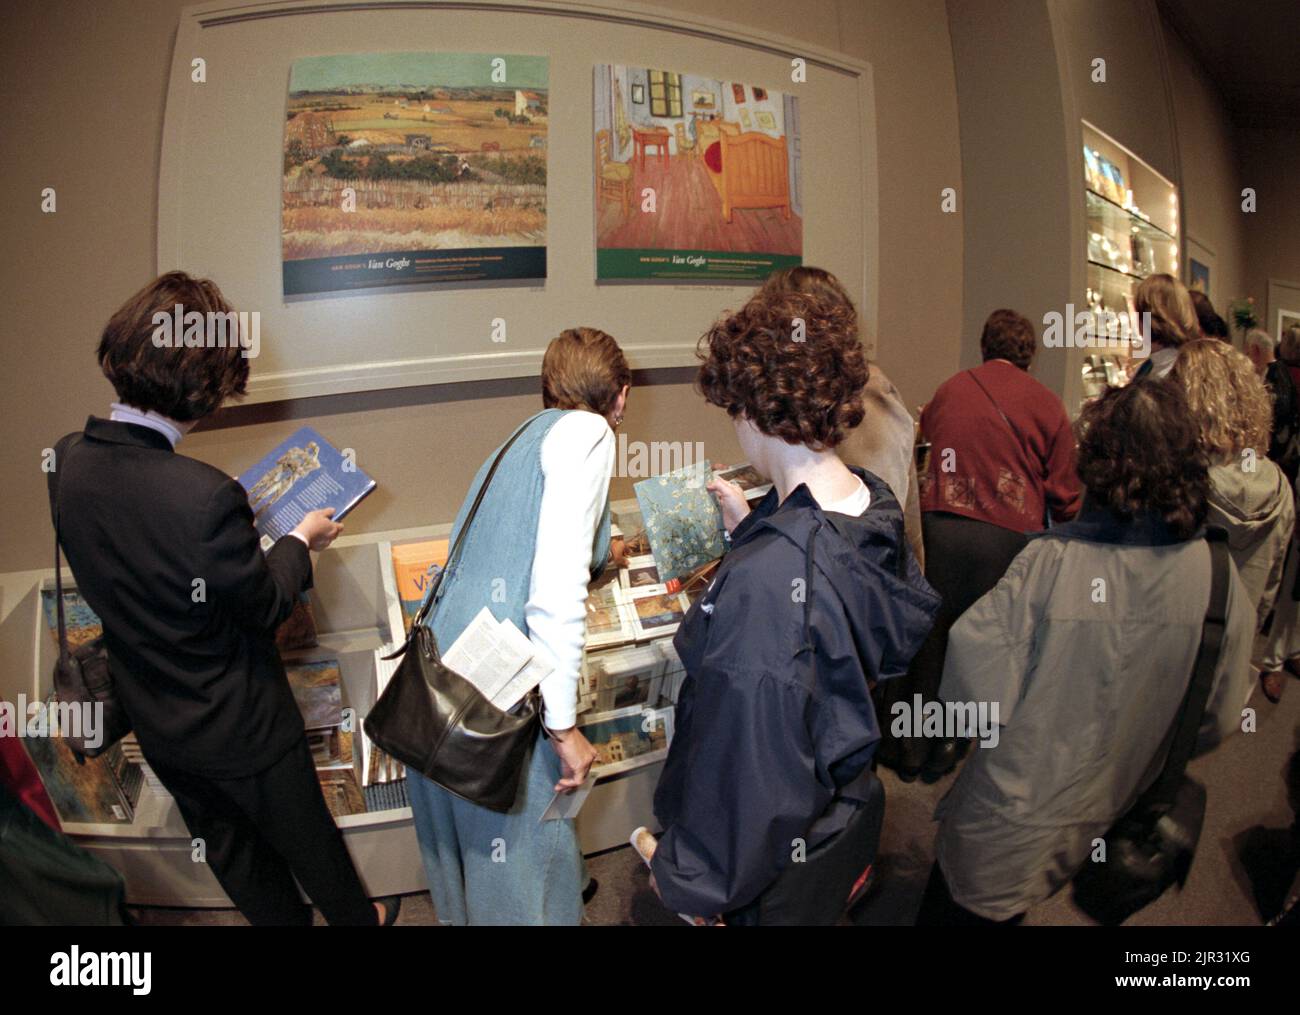 People crowd the gift shop to purchase items during the largest exhibit of artworks by the painter Vincent Van Gogh in 25-years at the National Gallery of Art, October 9, 1998 in Washington, DC. More than 70 masterpieces are on loan from the Van Gogh Museum in Amsterdam for the exhibition. Stock Photo